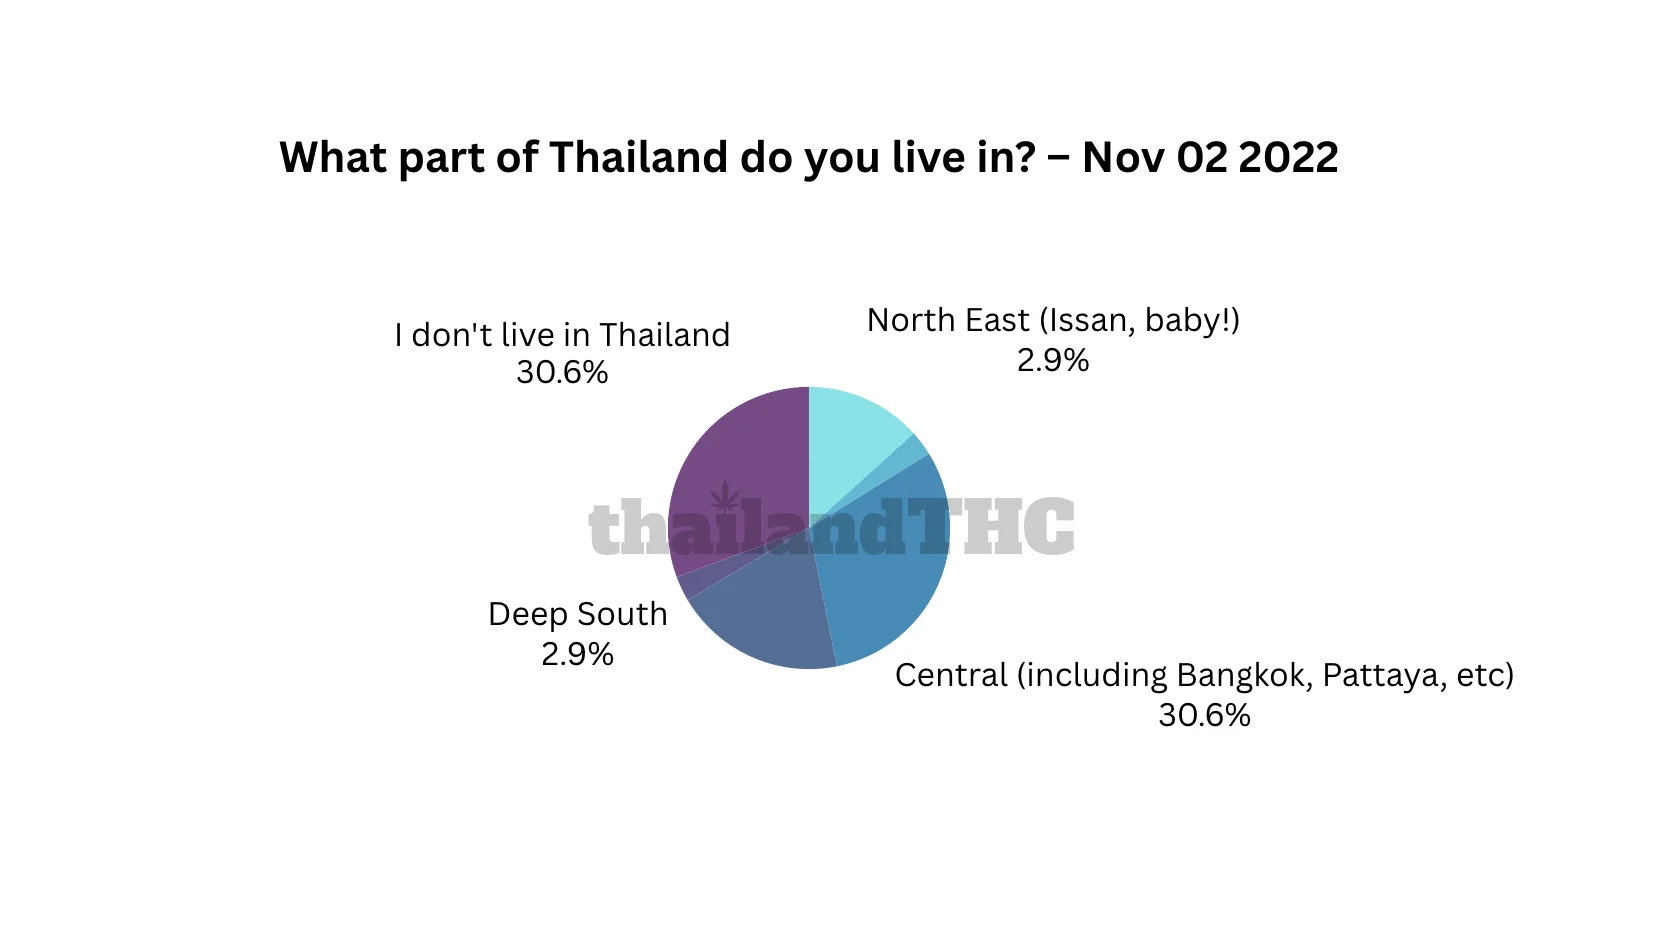 What part of Thailand do you live in?